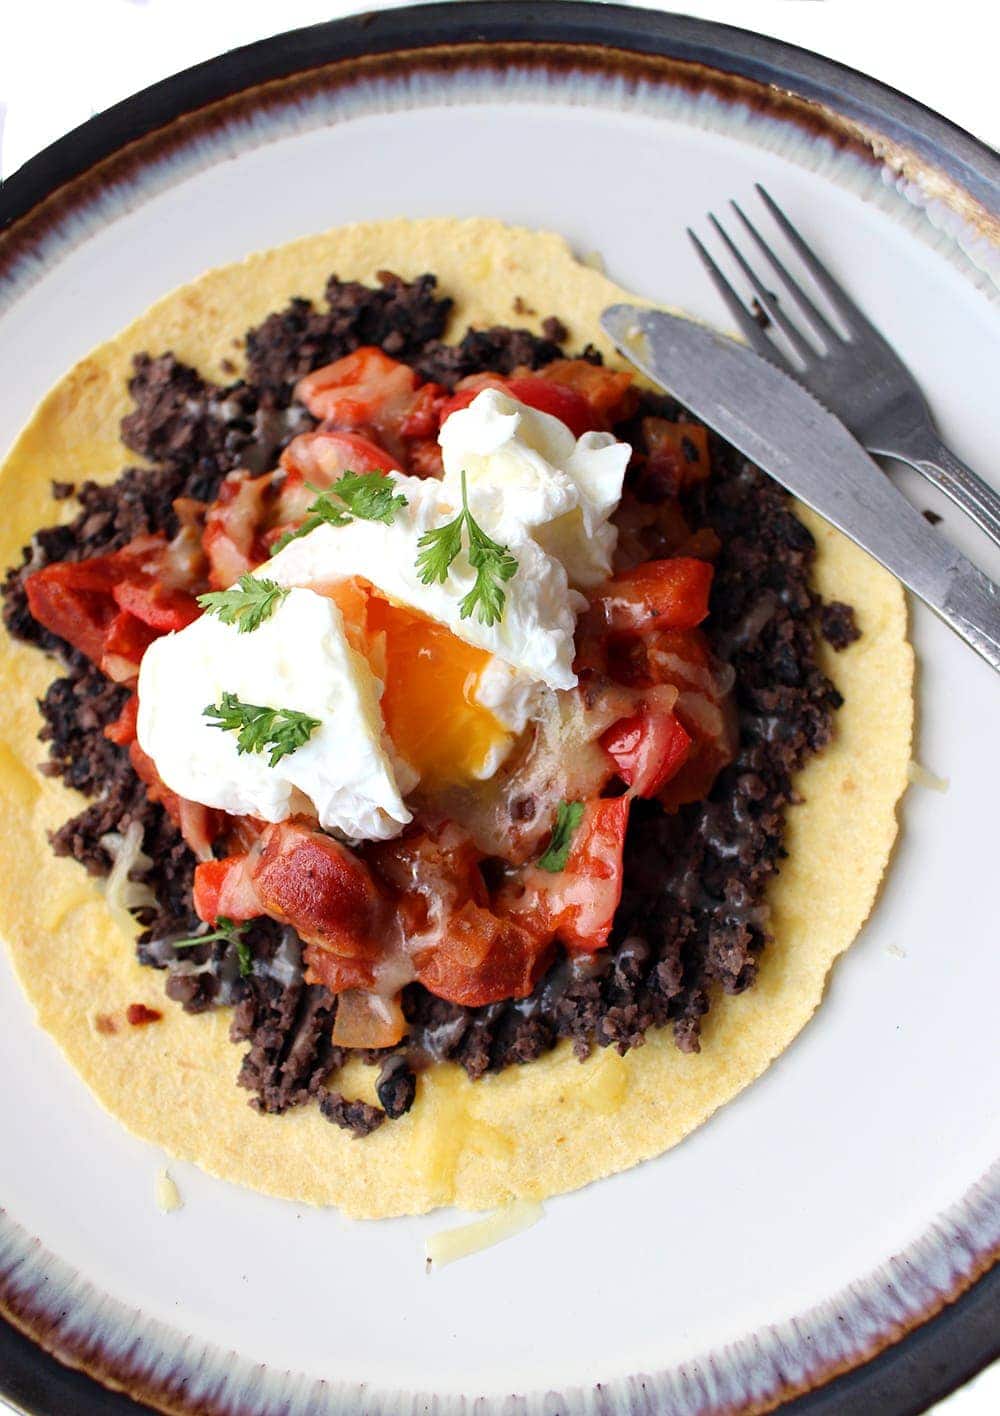 This chorizo huevos rancheros is a super easy breakfast which still feels like such a treat! It includes a super quick refried bean substitute and loads of flavour from the chorizo.